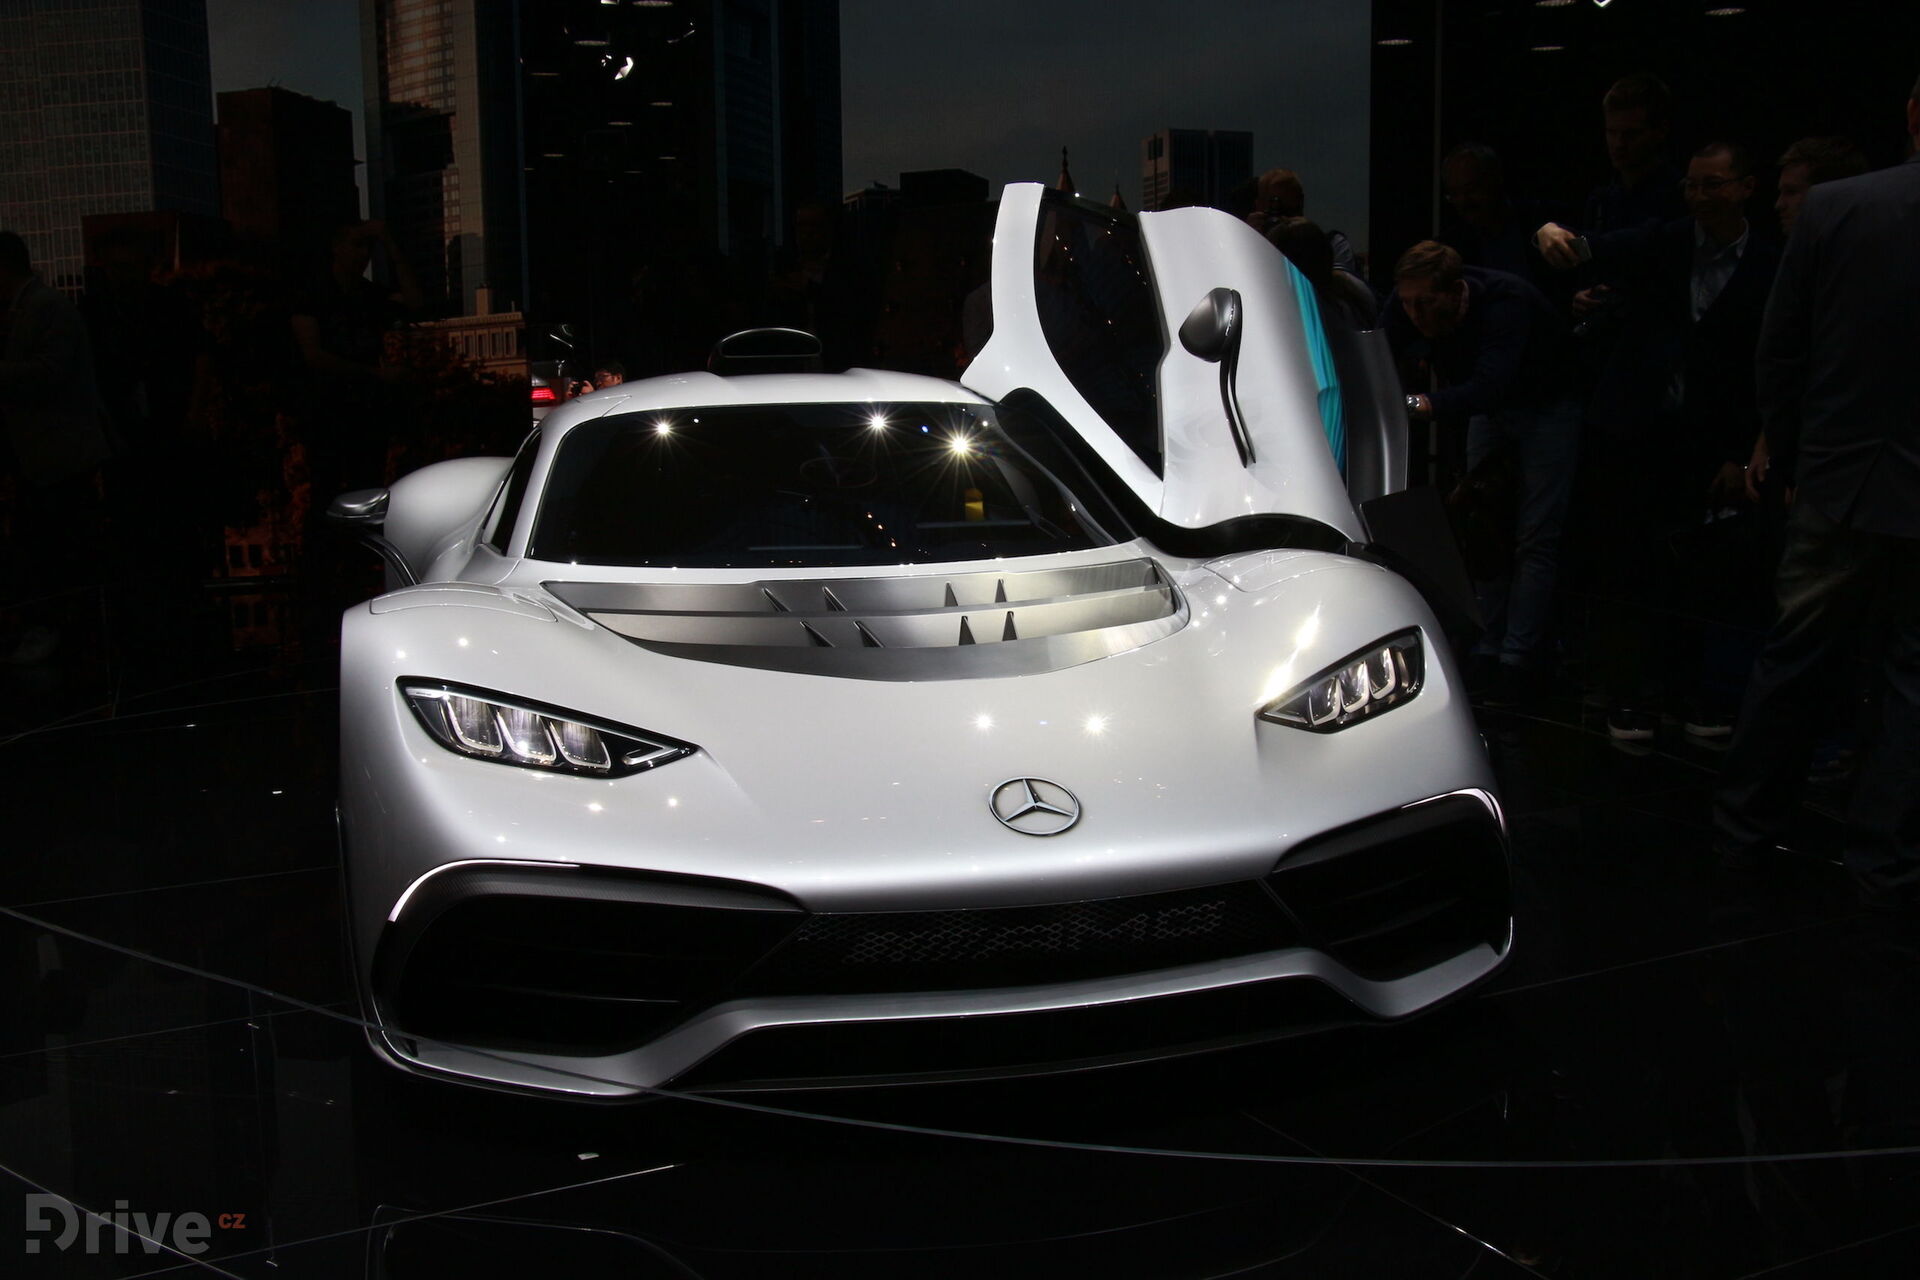 Mercedes-Benz AMG Project One